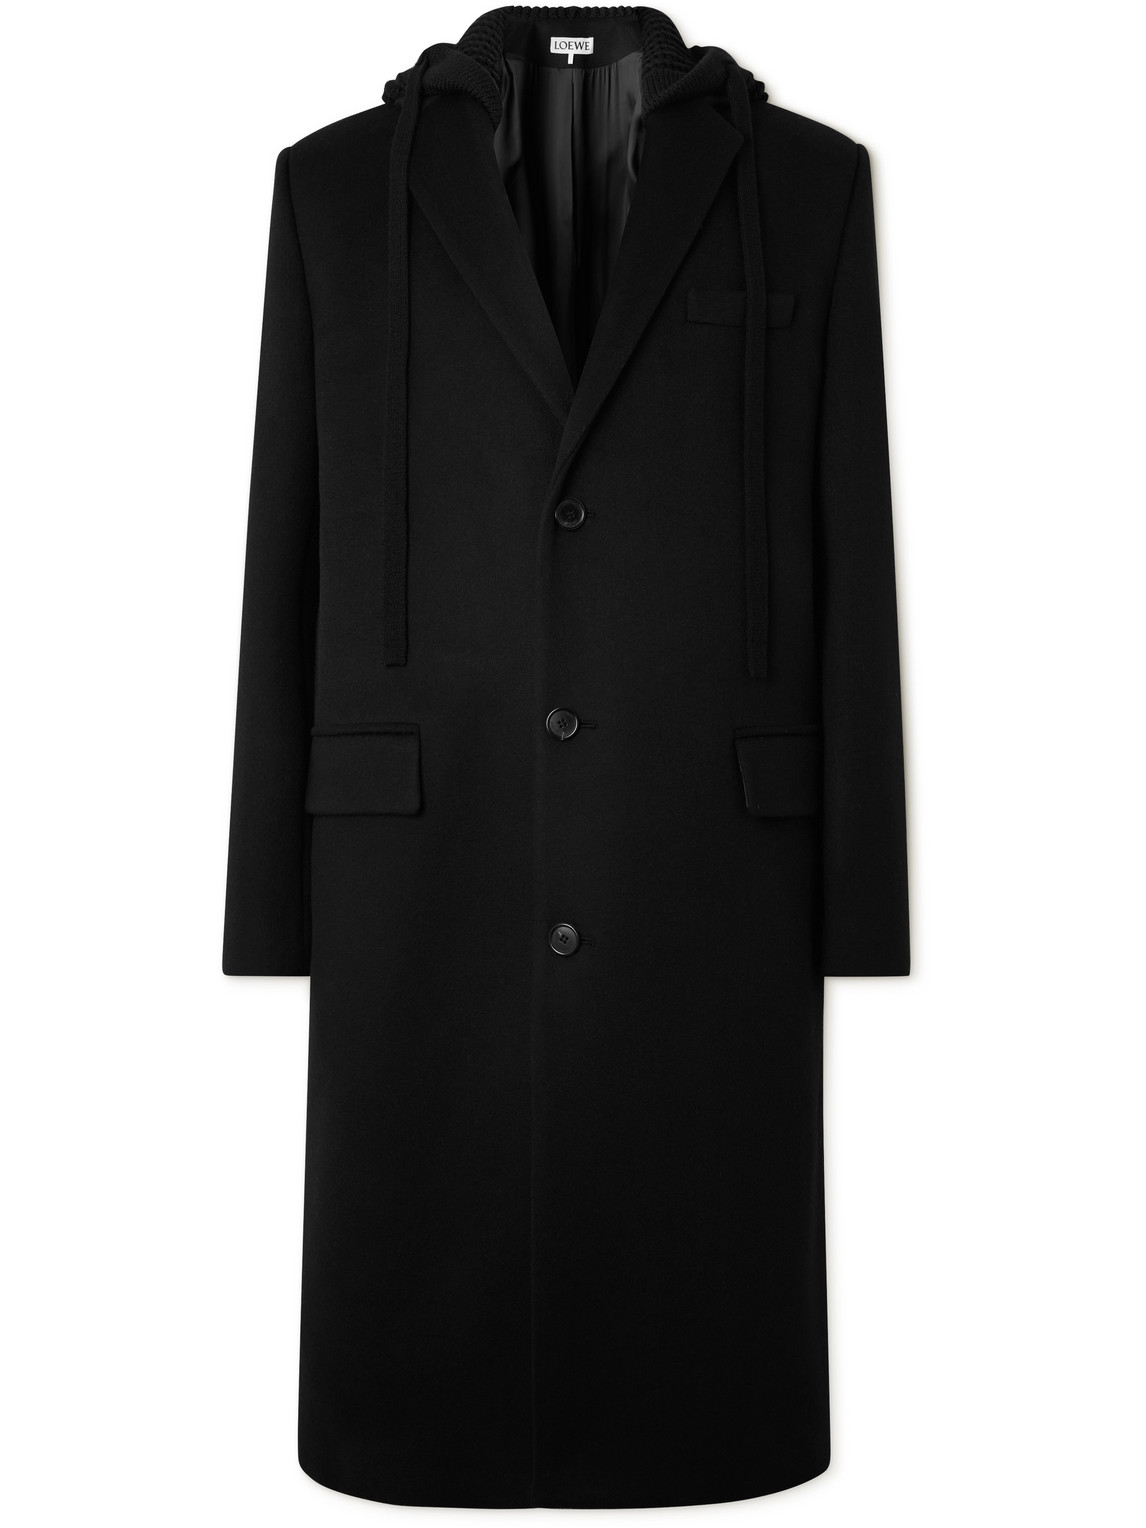 LOEWE WOOL-BLEND JERSEY-TRIMMED WOOL AND CASHMERE-BLEND HOODED COAT